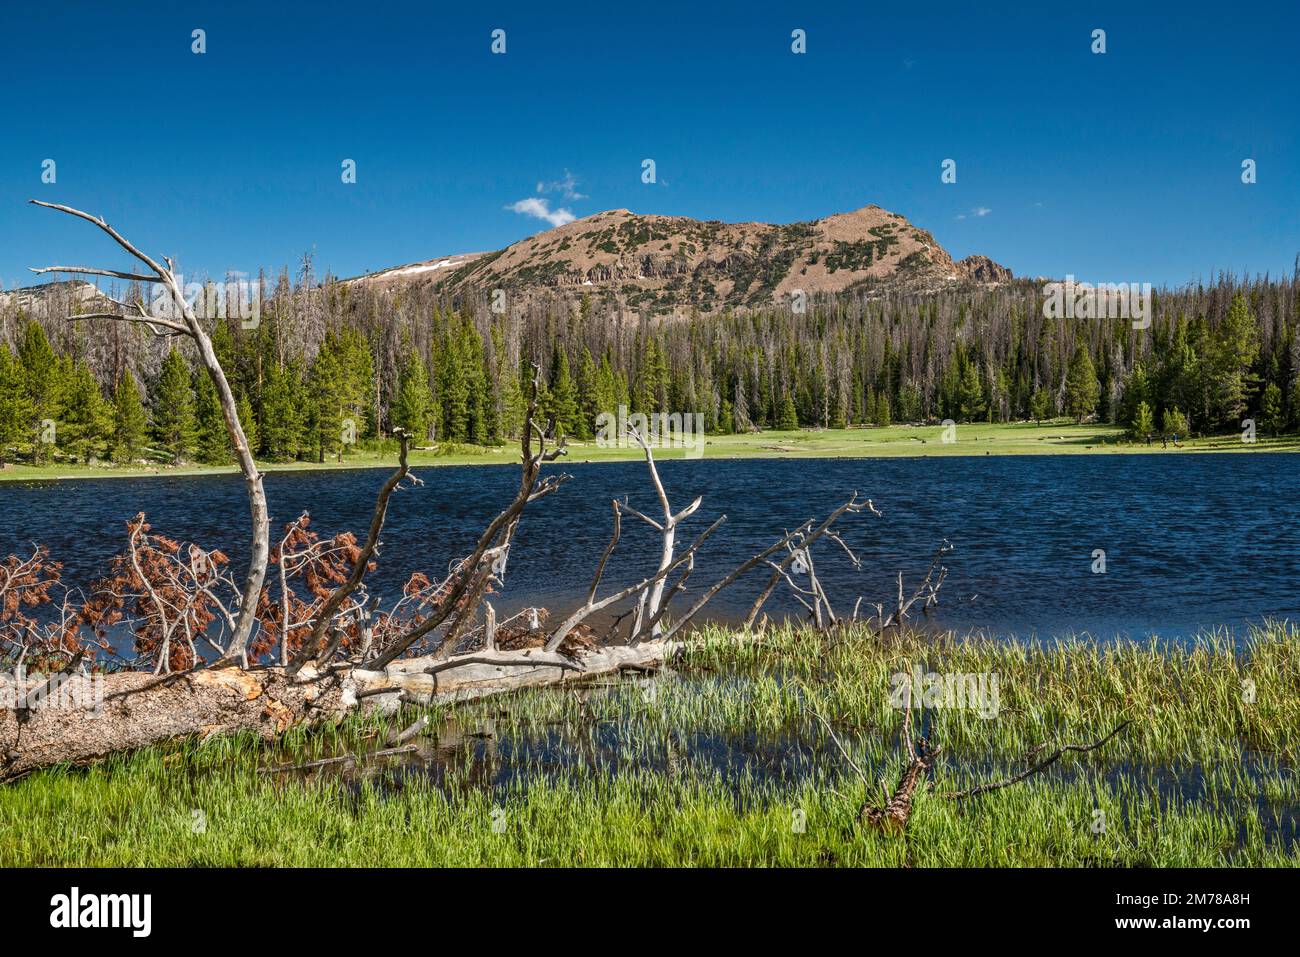 Lilly Lake, Notch Mountain, Mirror Lake Scenic Byway, Uinta Mountains, Uinta Wasatch cache National Forest, Utah, USA Foto Stock